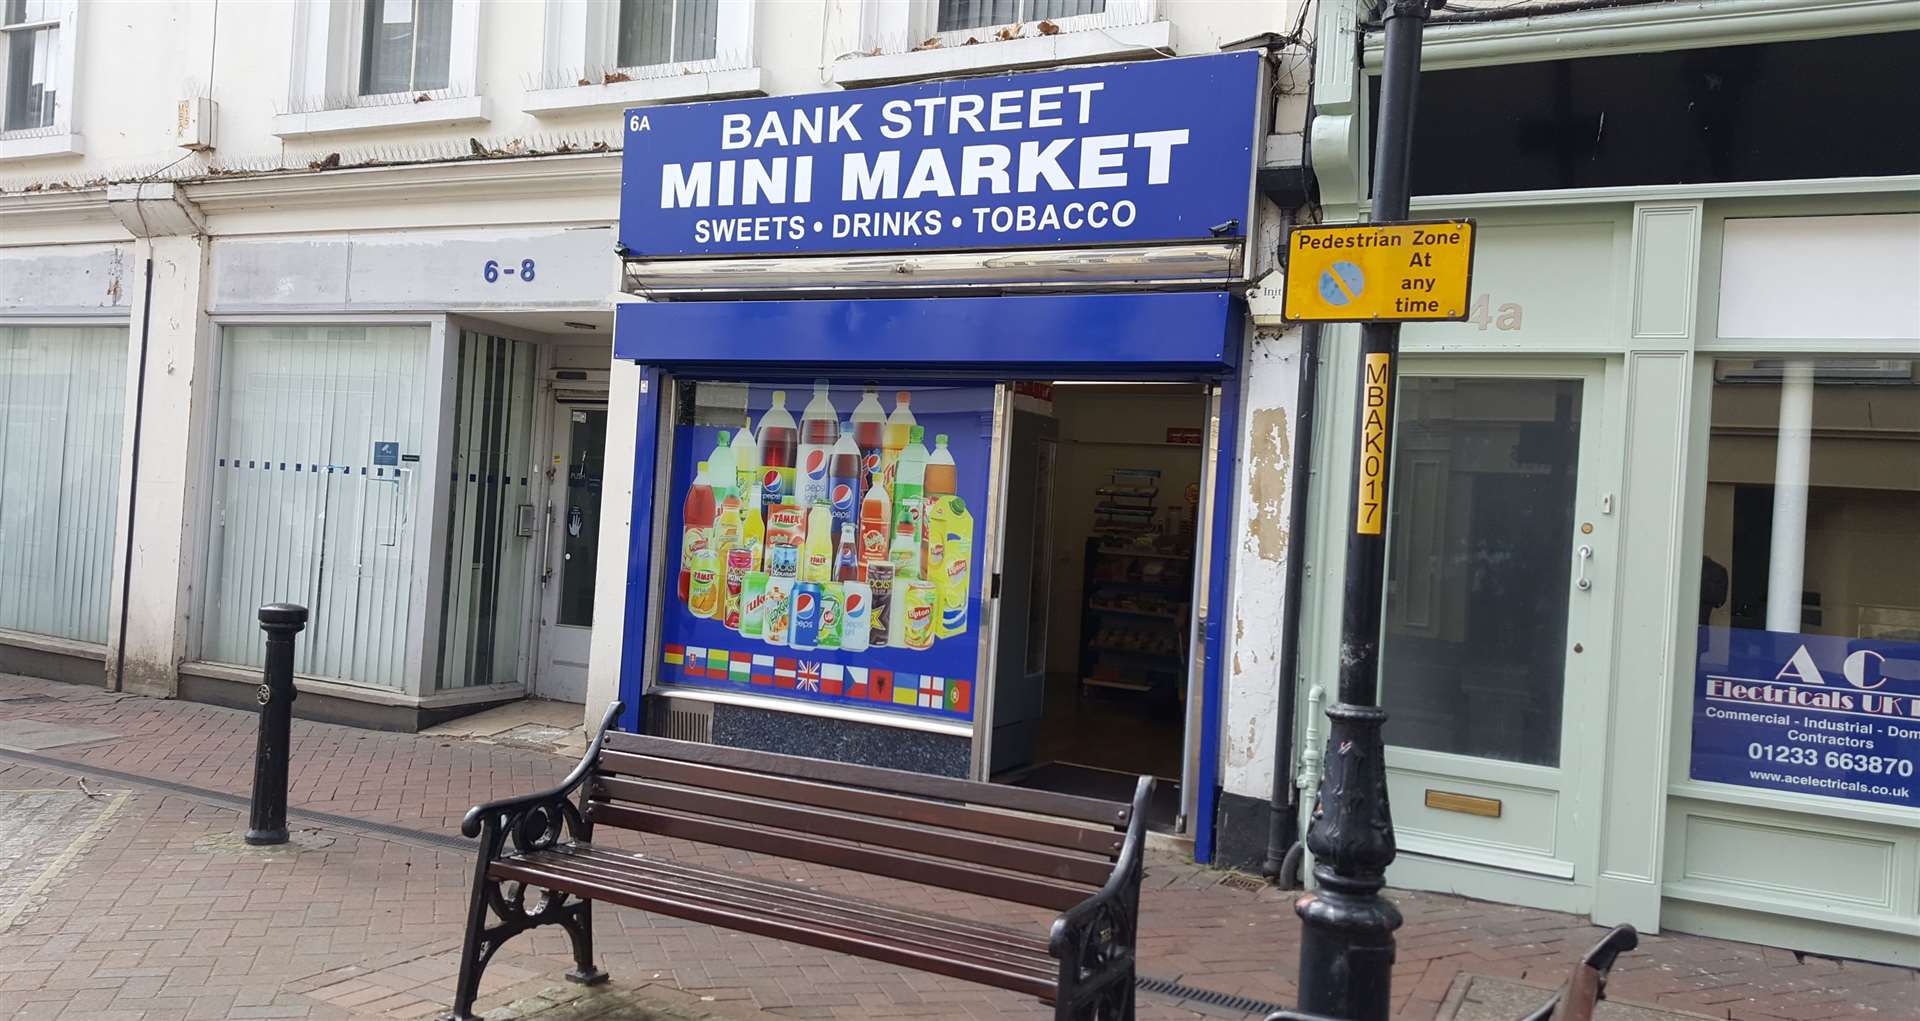 The Bank Street Mini Market pictured in April 2019